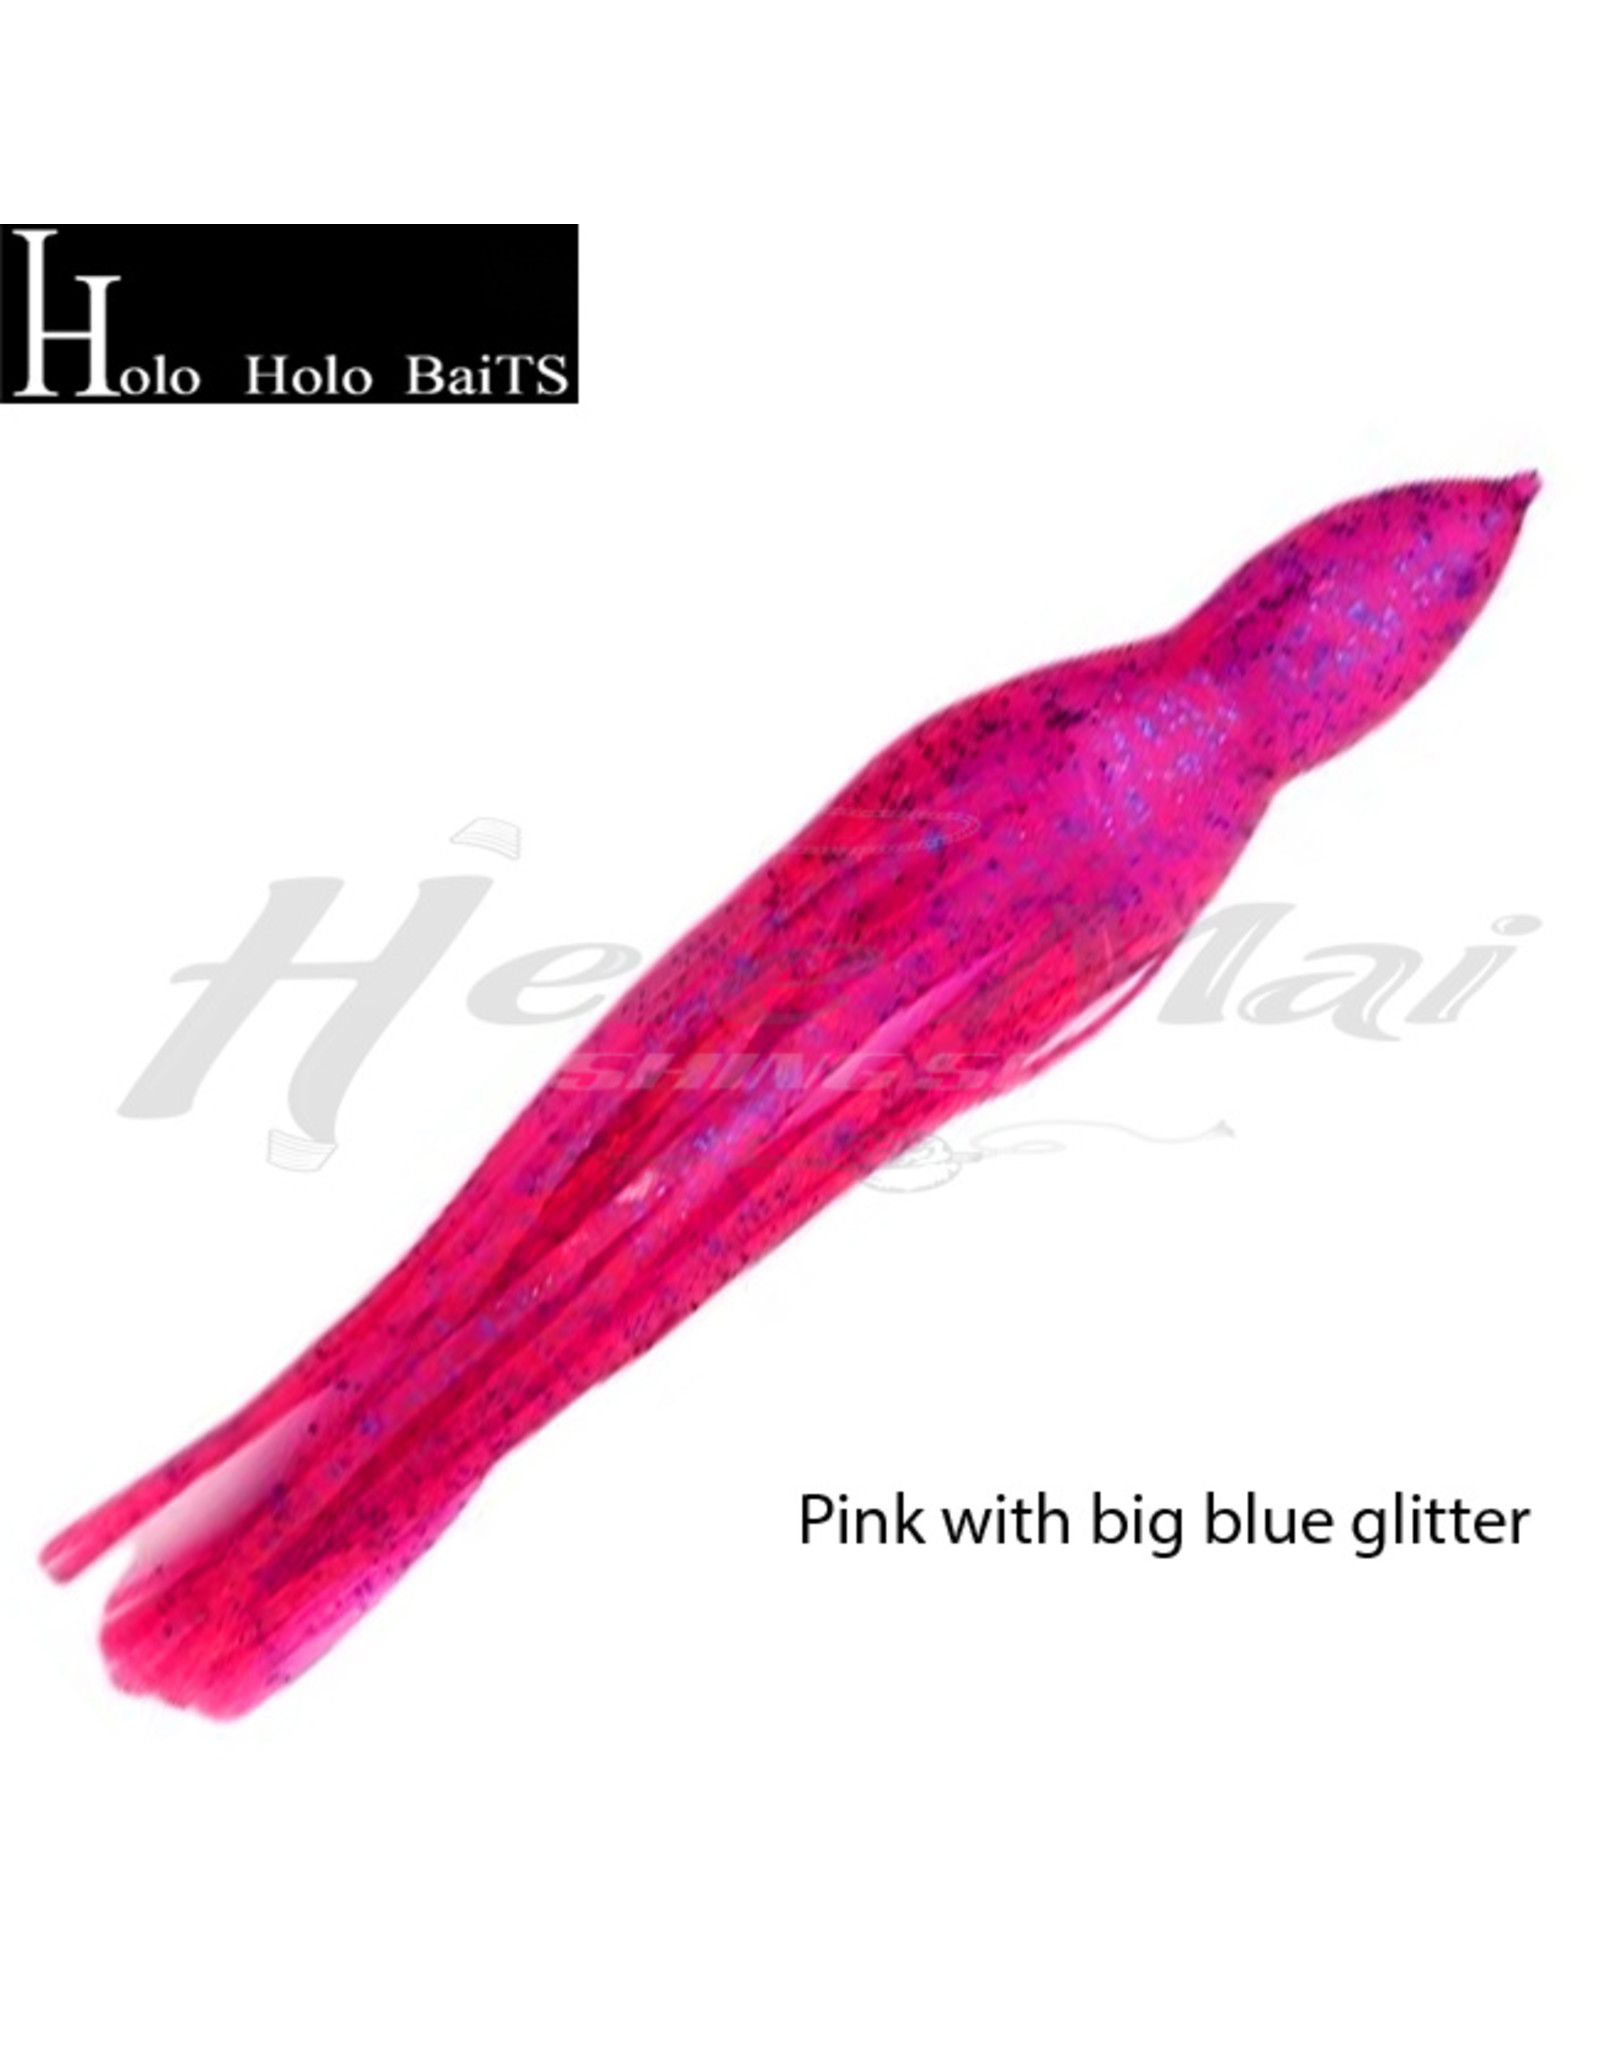 HOLO HOLO HH, 9" SQUID SKIRT PINK GLITTER 0887